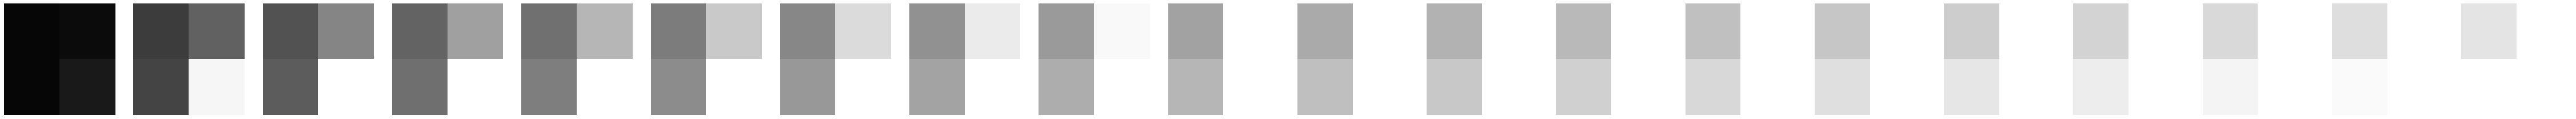 Subsampled representation of the multipixel dataset